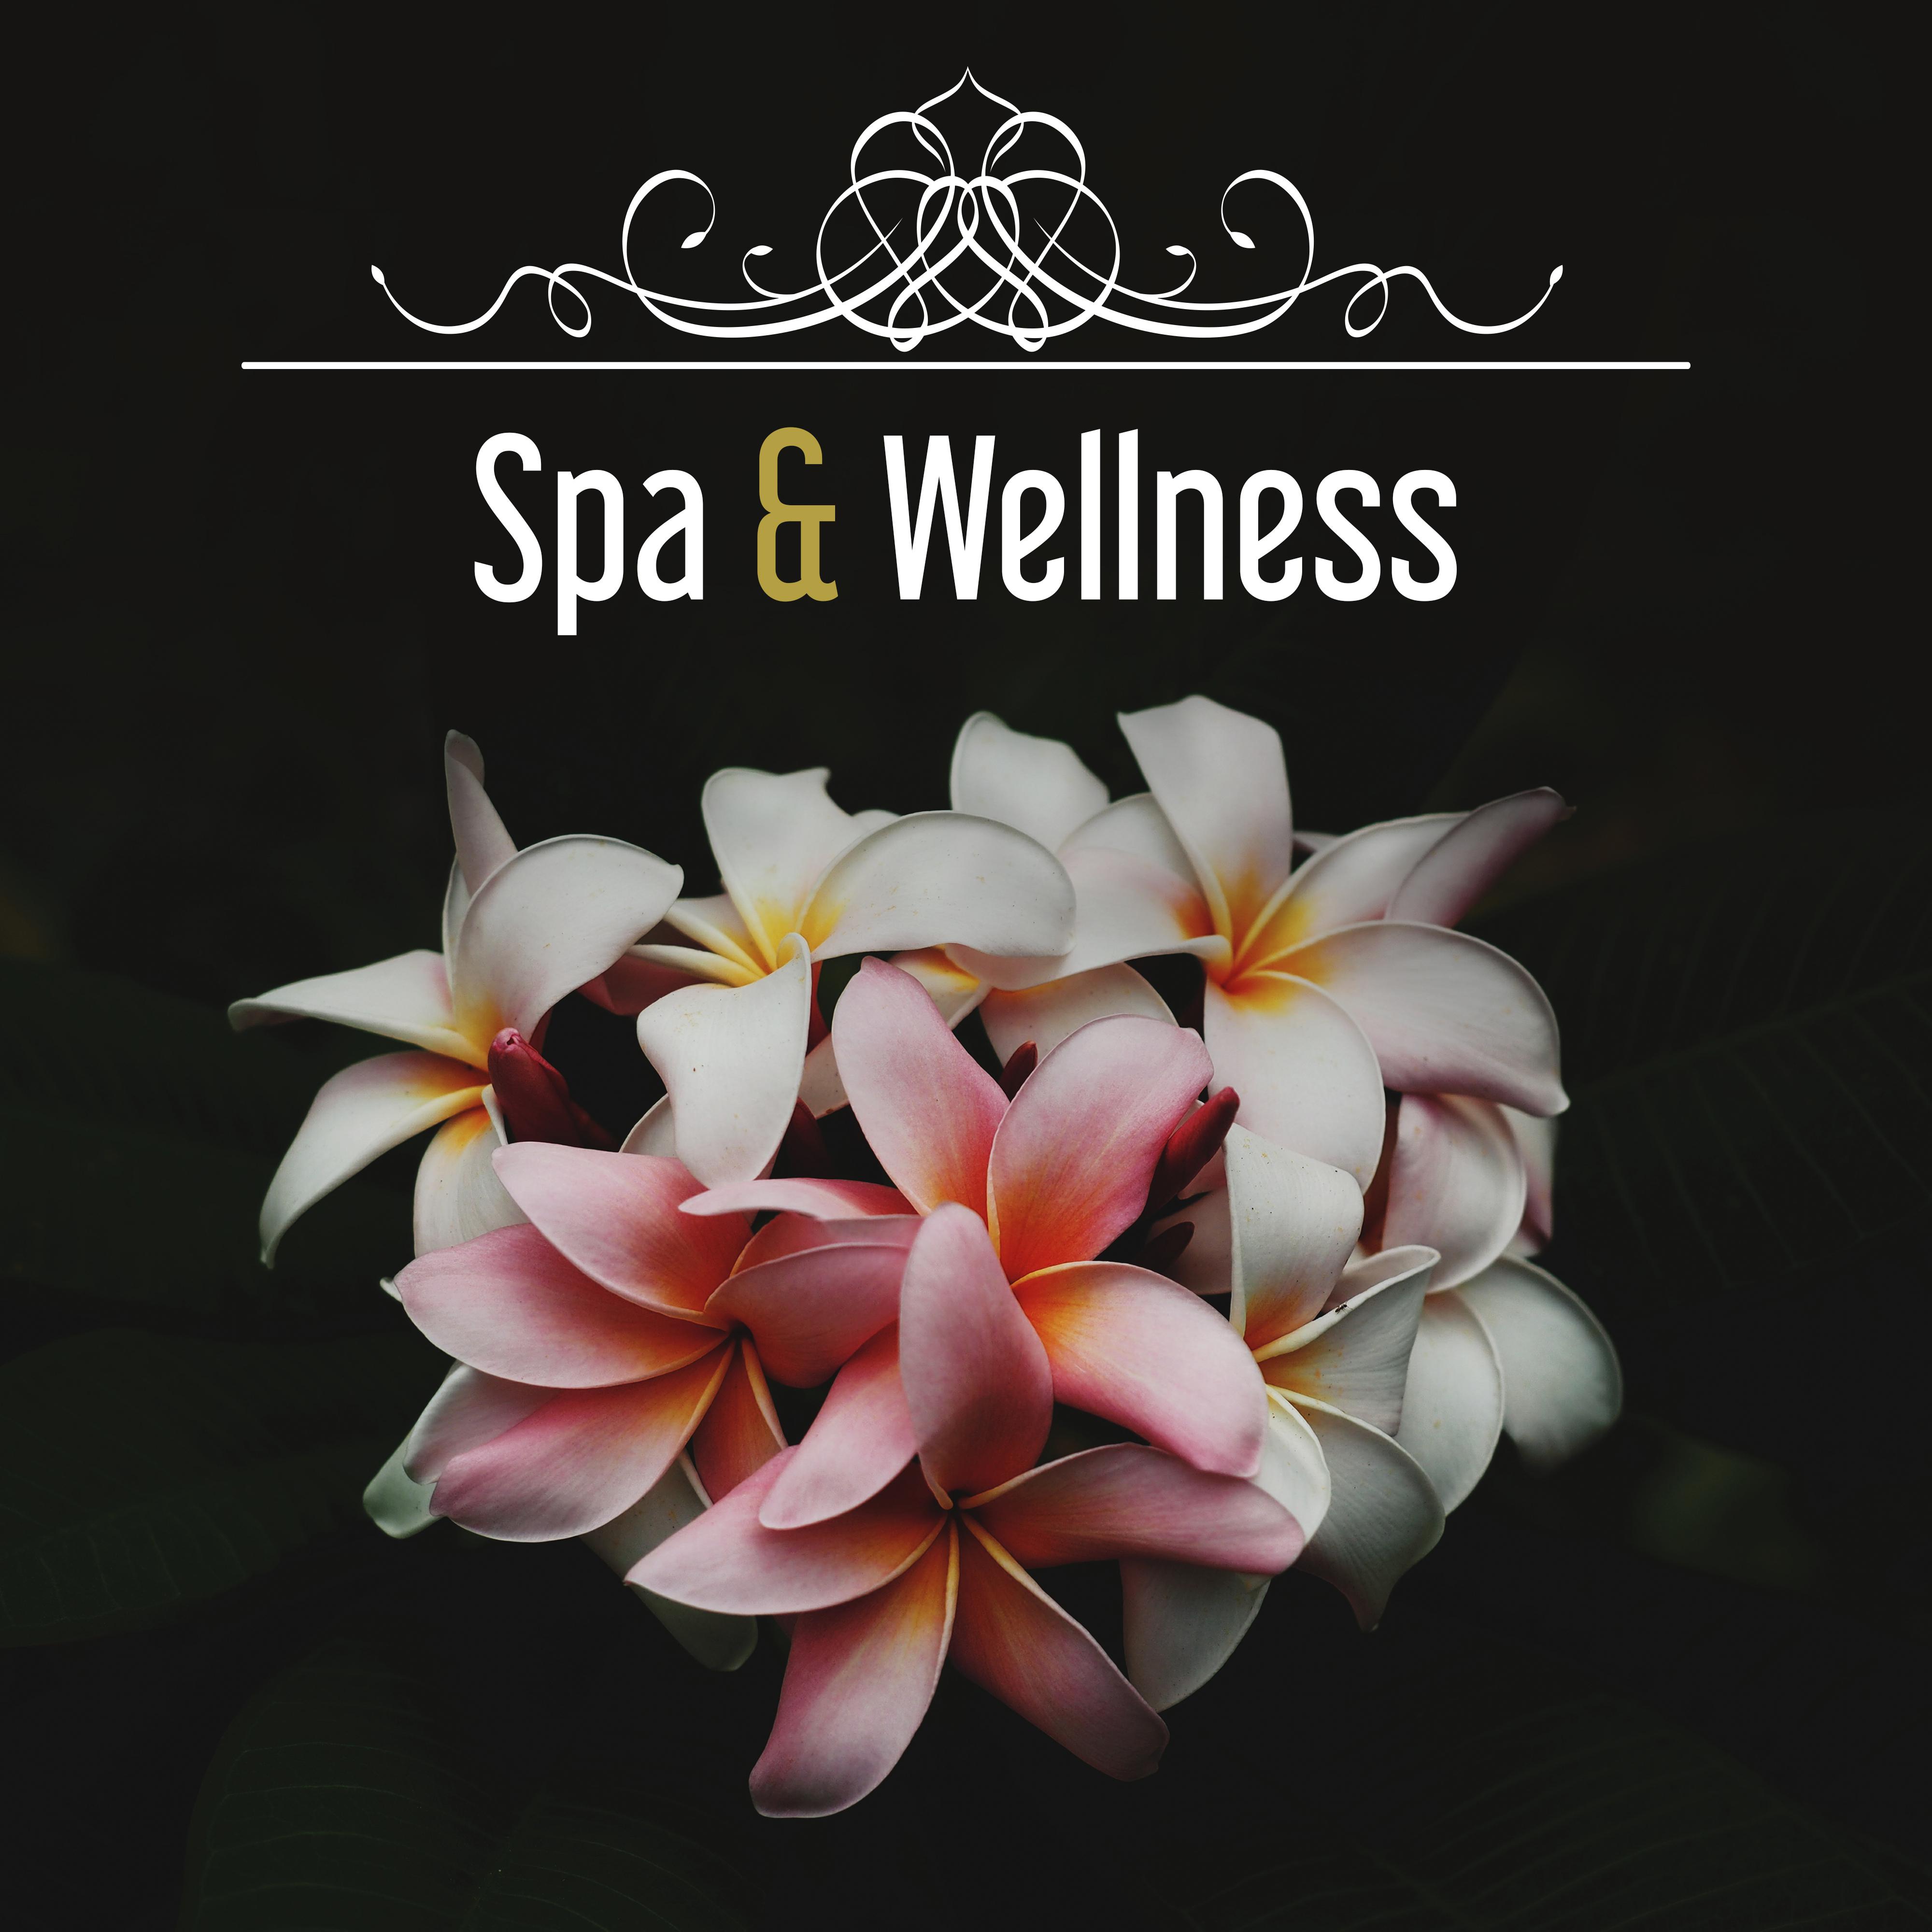 Spa & Wellness – Ambient Spa, Nature Sounds for Relaxation, Stress Free, Sensual Massage, Spa Music